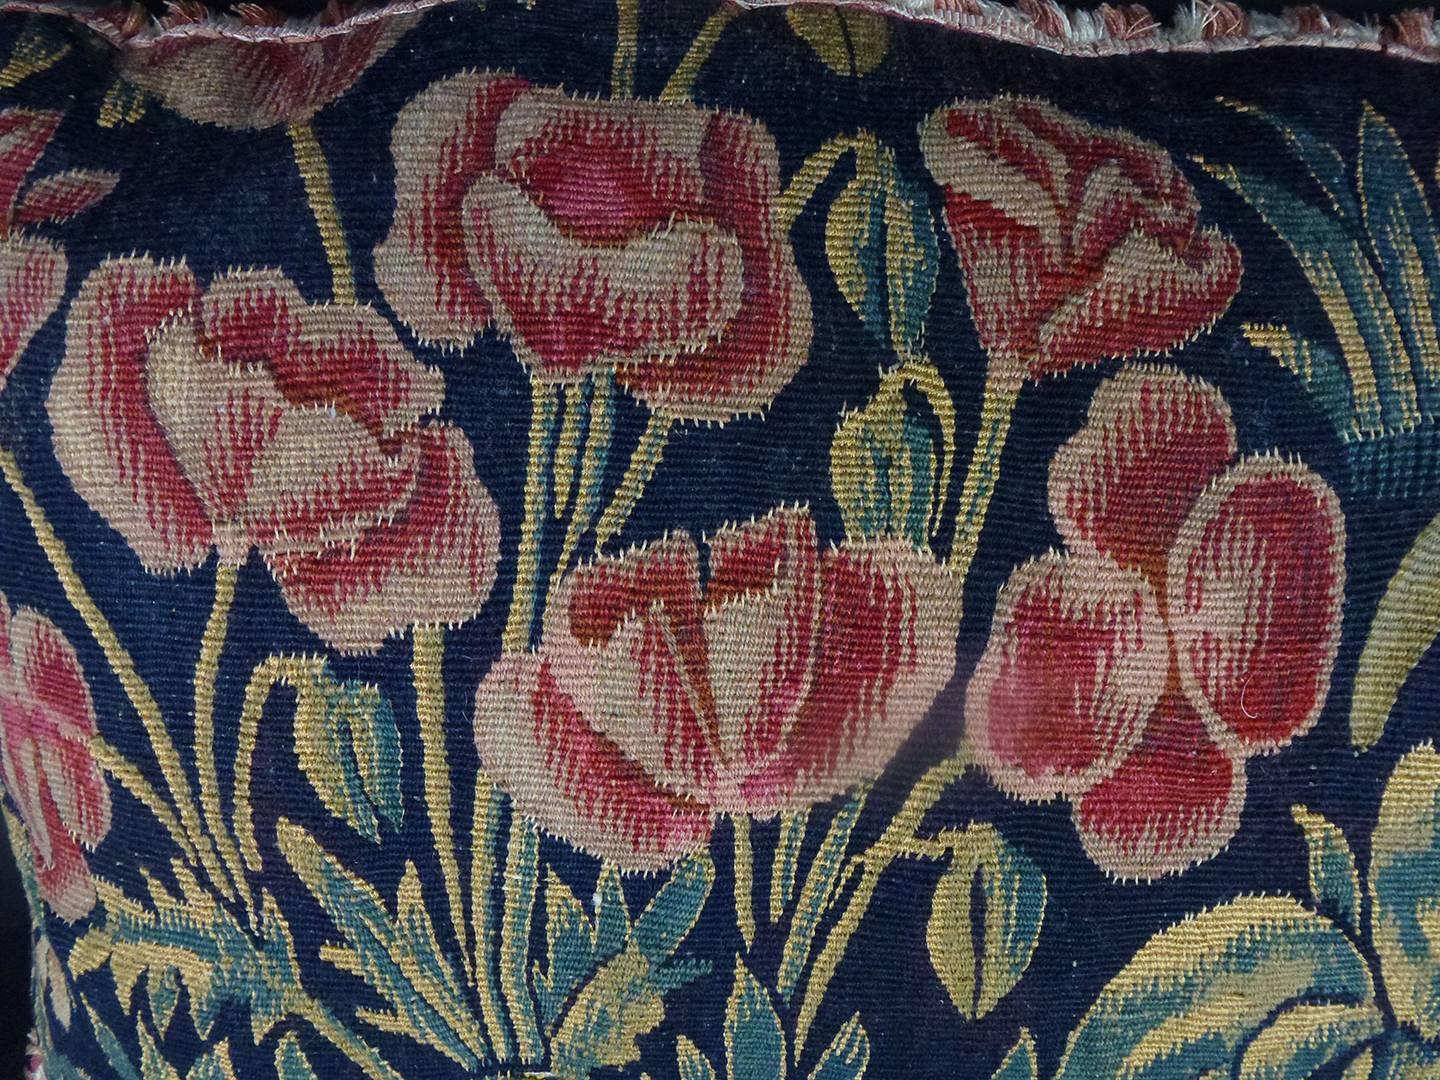 Tournai Gothic silk and wool tapestry floral pillow of rectangular form, the deep blue ground with red tulips on green stems, ferns, acanthus, and water reeds, trimmed with red edges, the colors very intense and well-preserved. The verso of natural